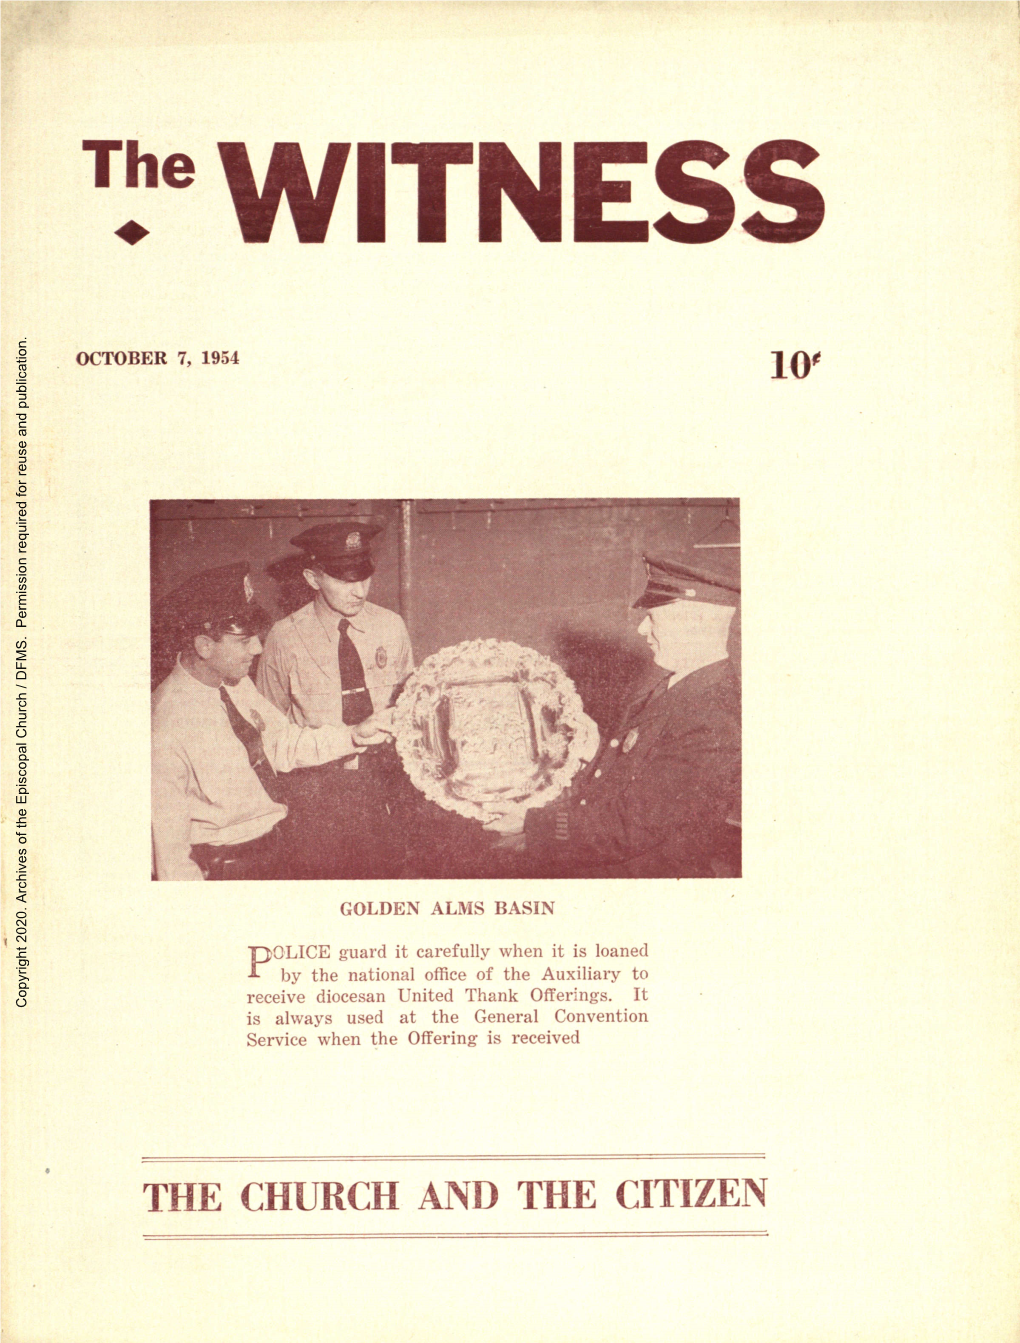 1954 the Witness, Vol. 41, No. 46. October 7, 1954